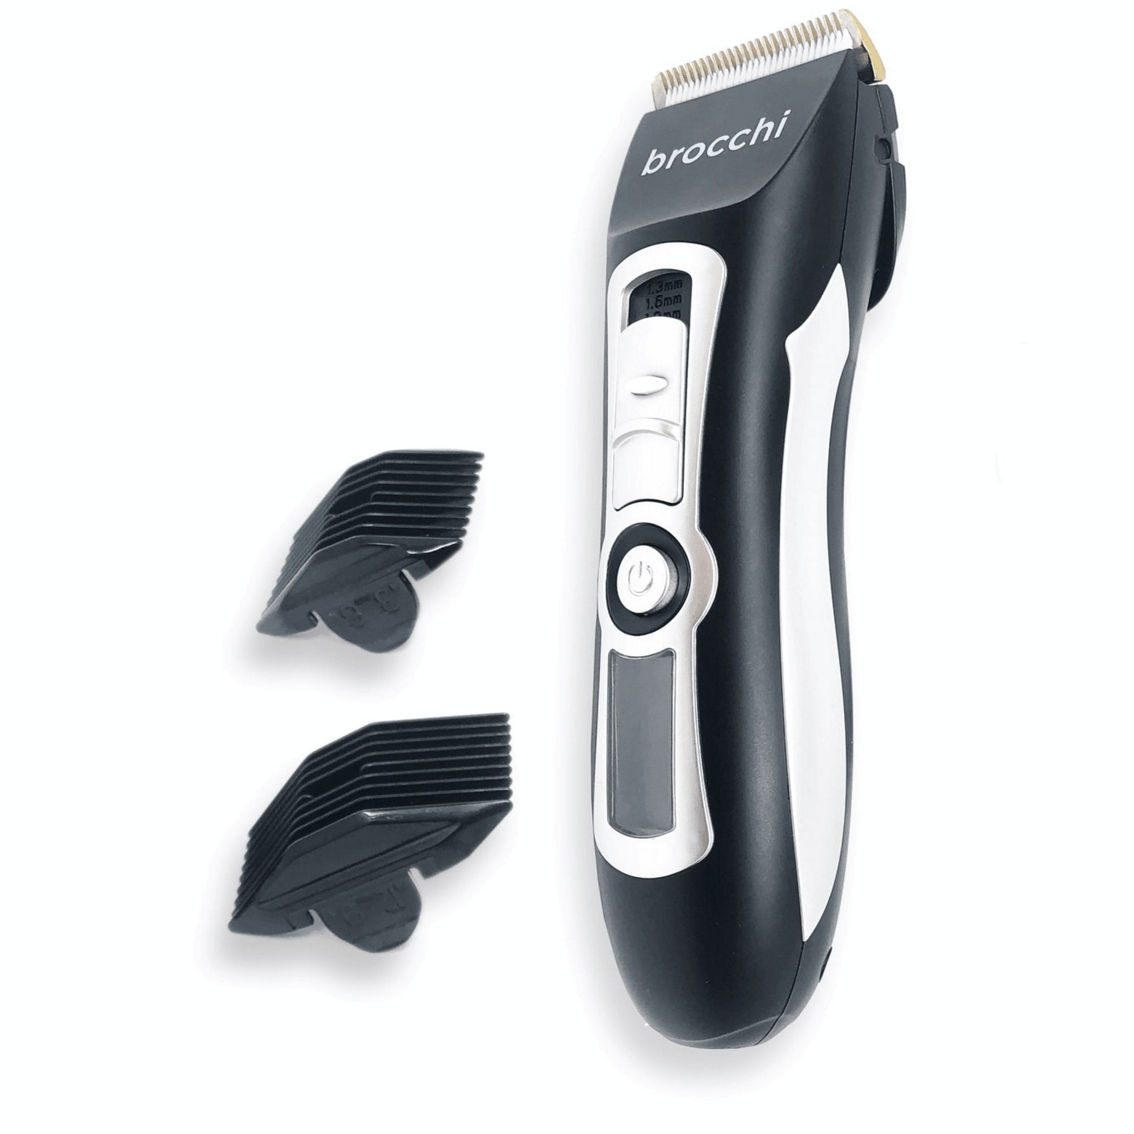 Brocchi | All-In-One Grooming | Digital Face & Body Hair Trimmer - Image 3 of 4